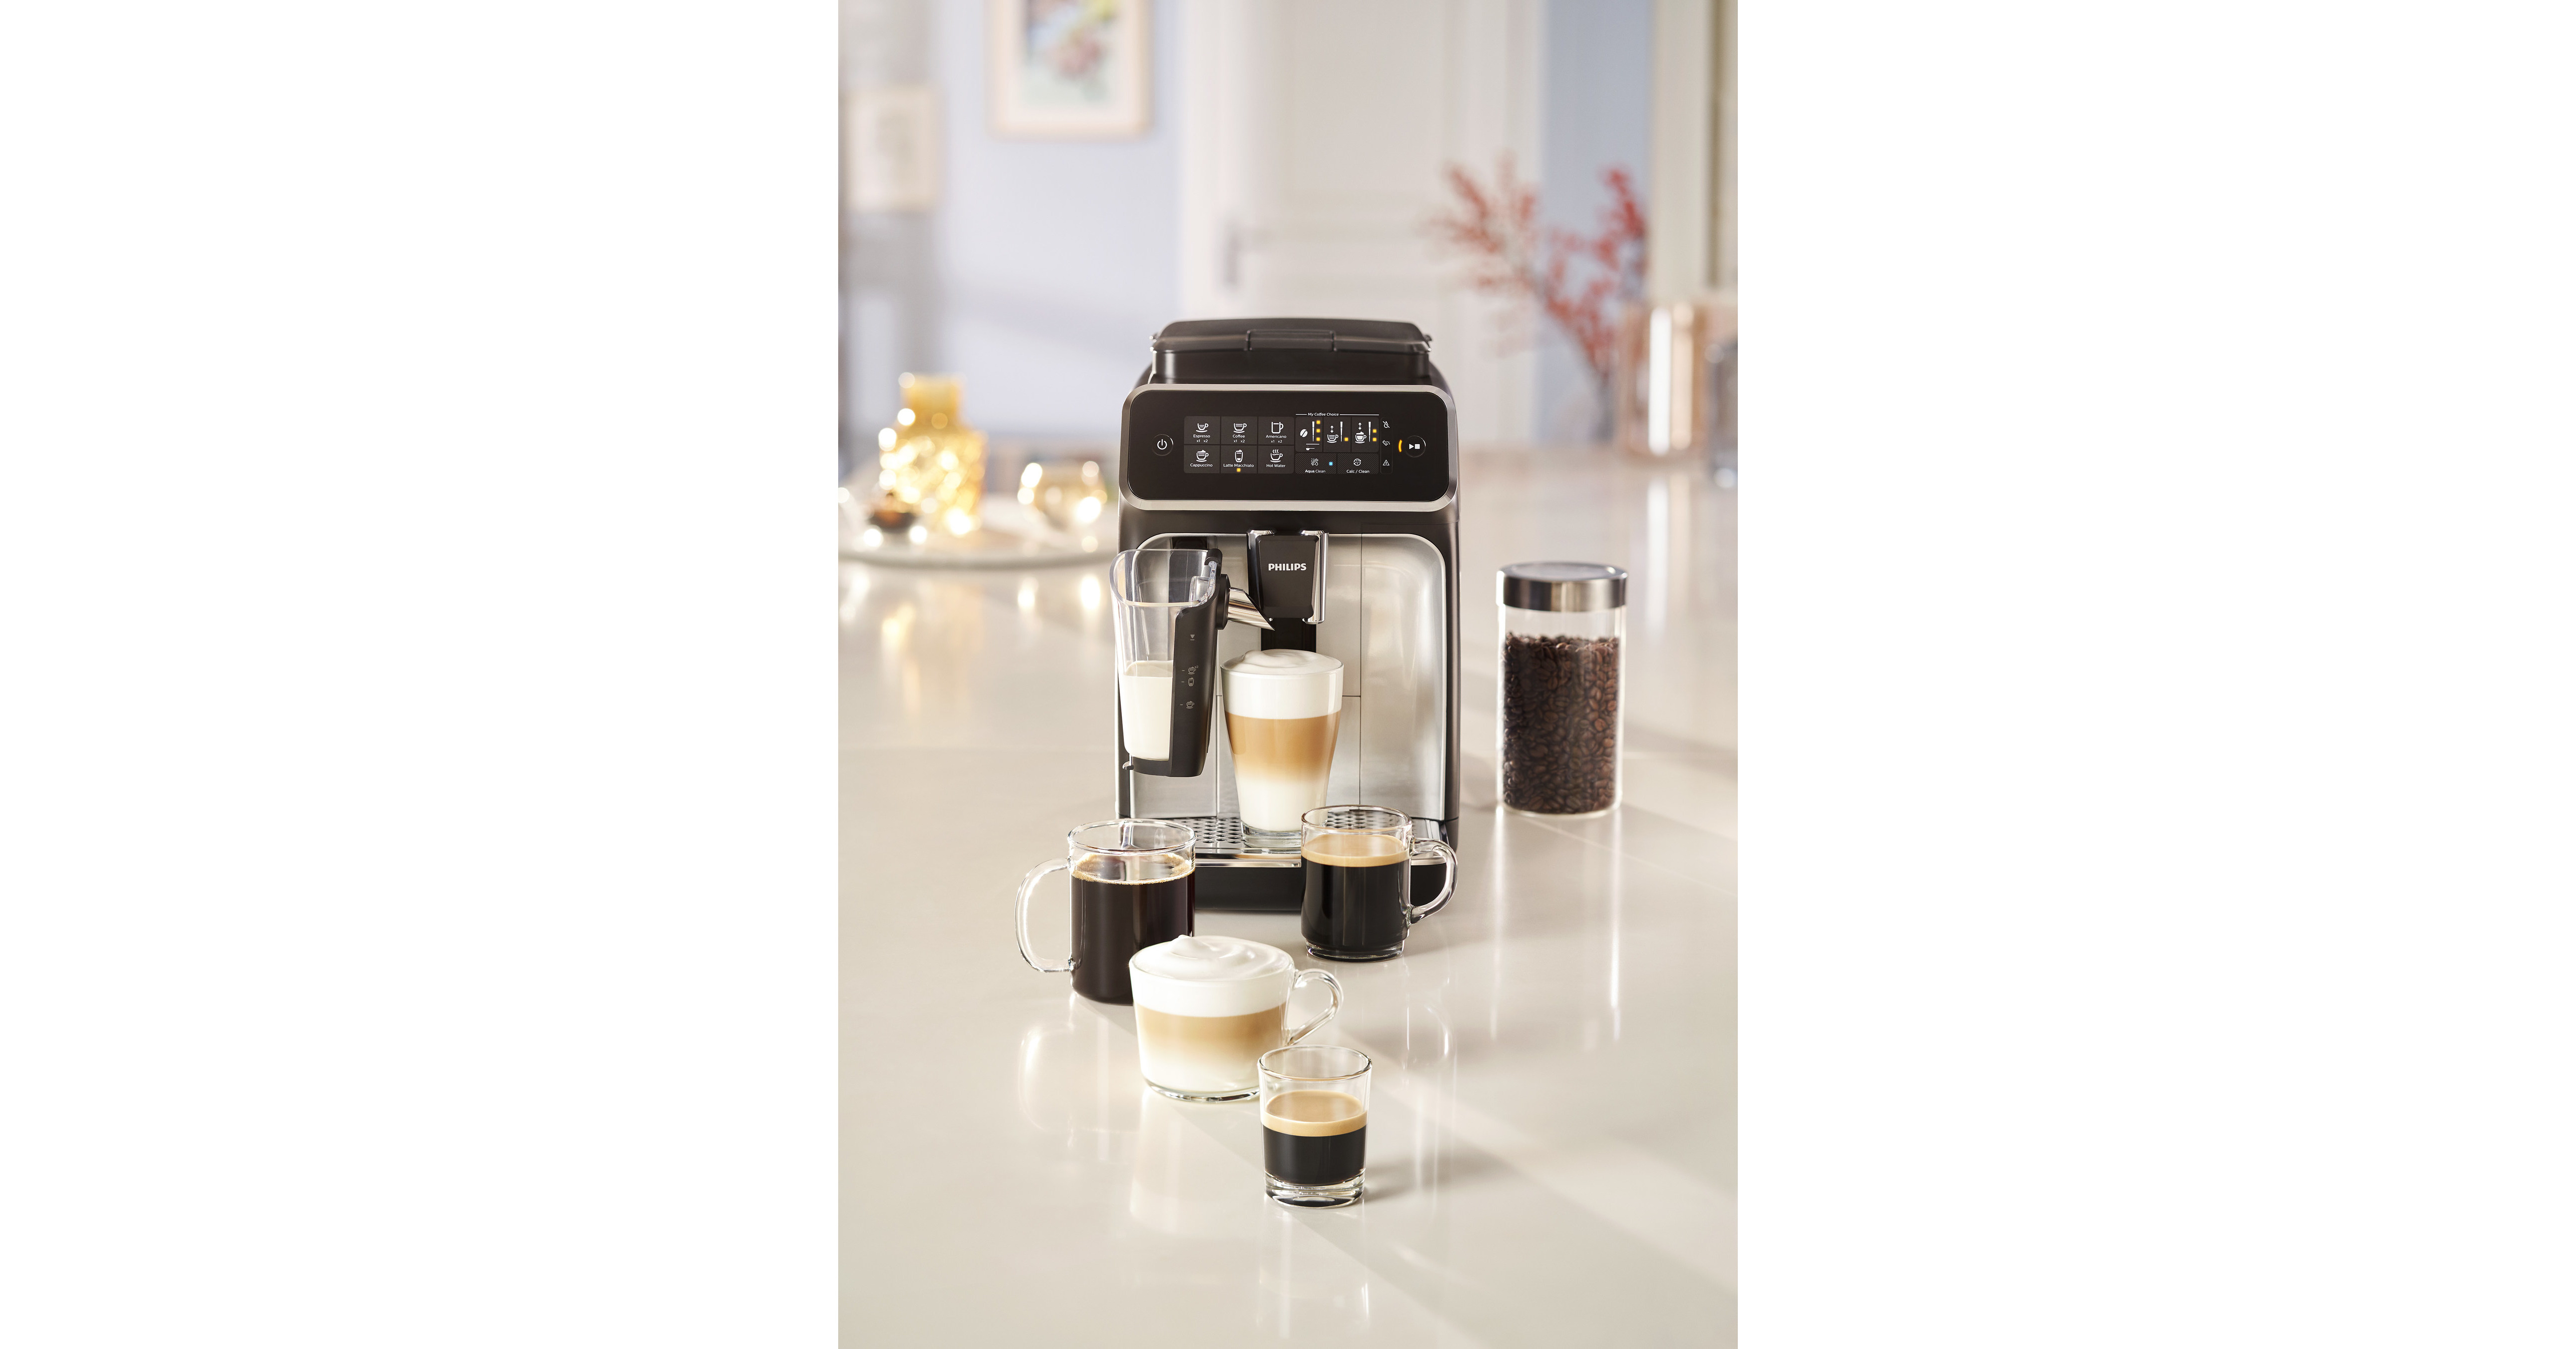 Trillen systeem Oeps New automatic espresso machines from Philips offer an easier way to make  café-style coffees at home